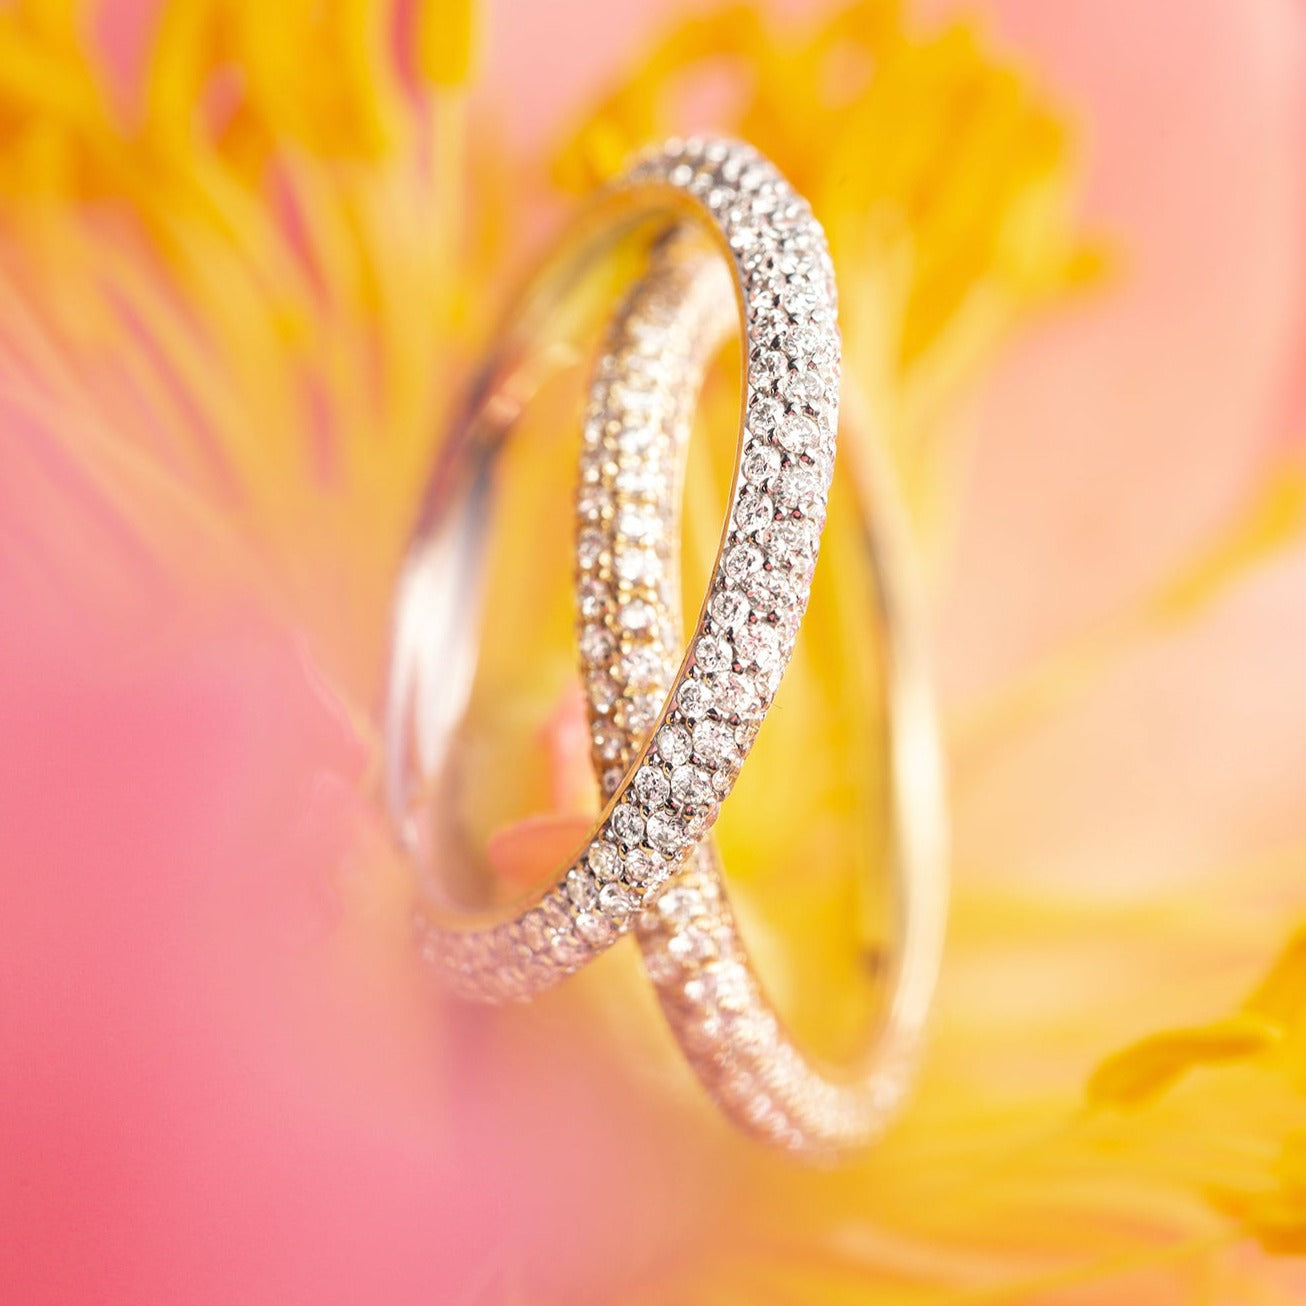 The Dalliance Pavé Rings - both White Gold and Yellow Gold shown on their sides here - feature three rows of pavé diamonds to allow maximum sparkle on the finger.